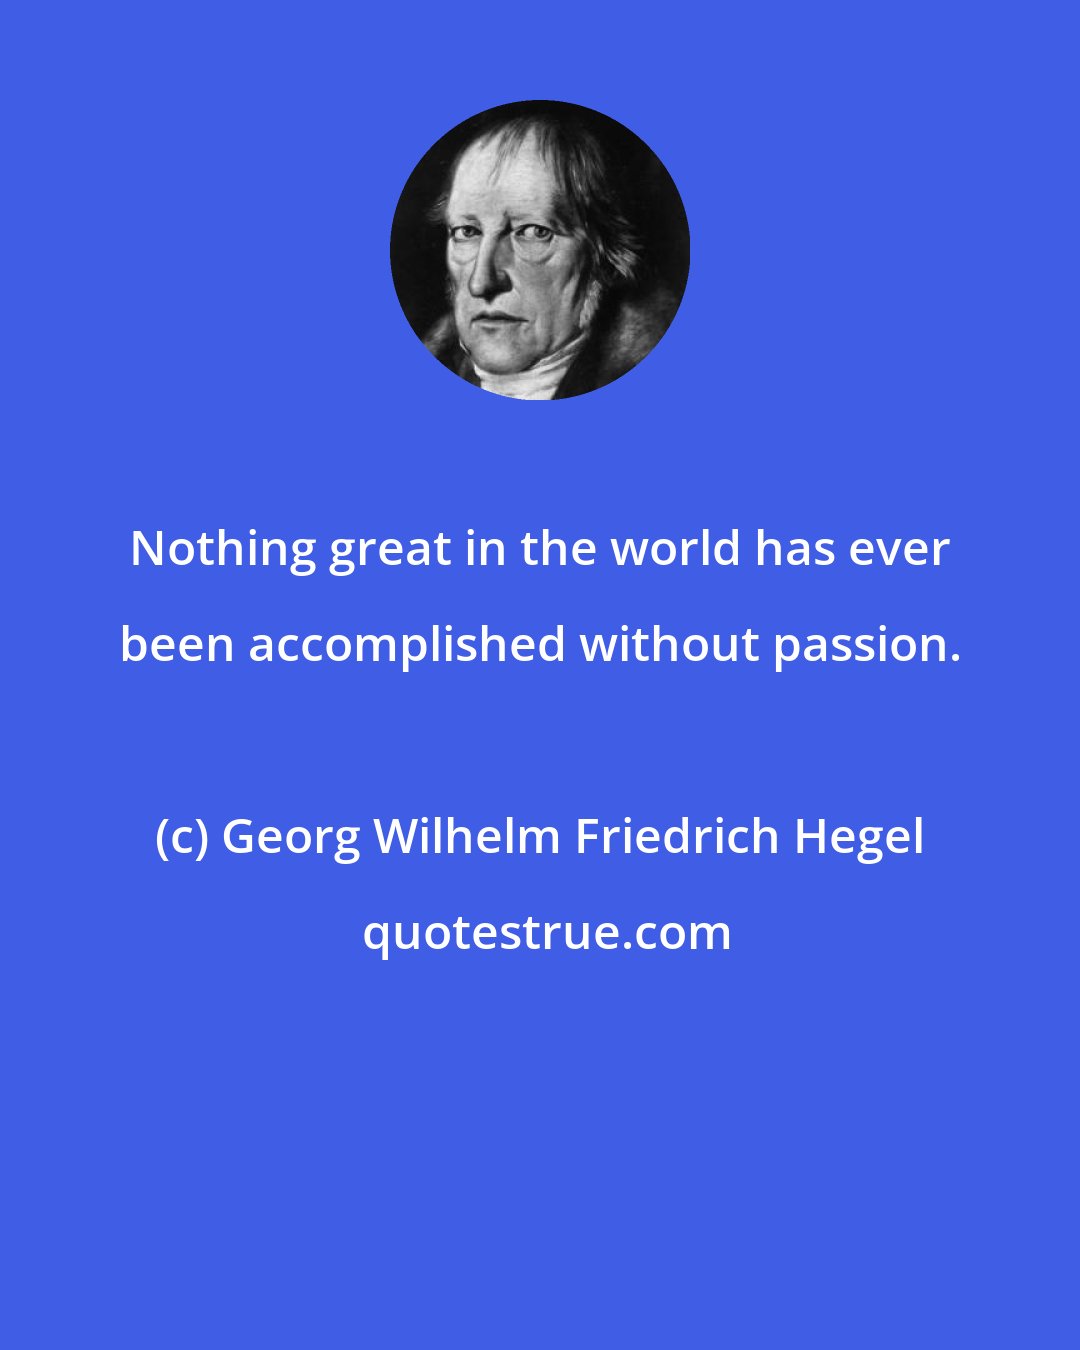 Georg Wilhelm Friedrich Hegel: Nothing great in the world has ever been accomplished without passion.